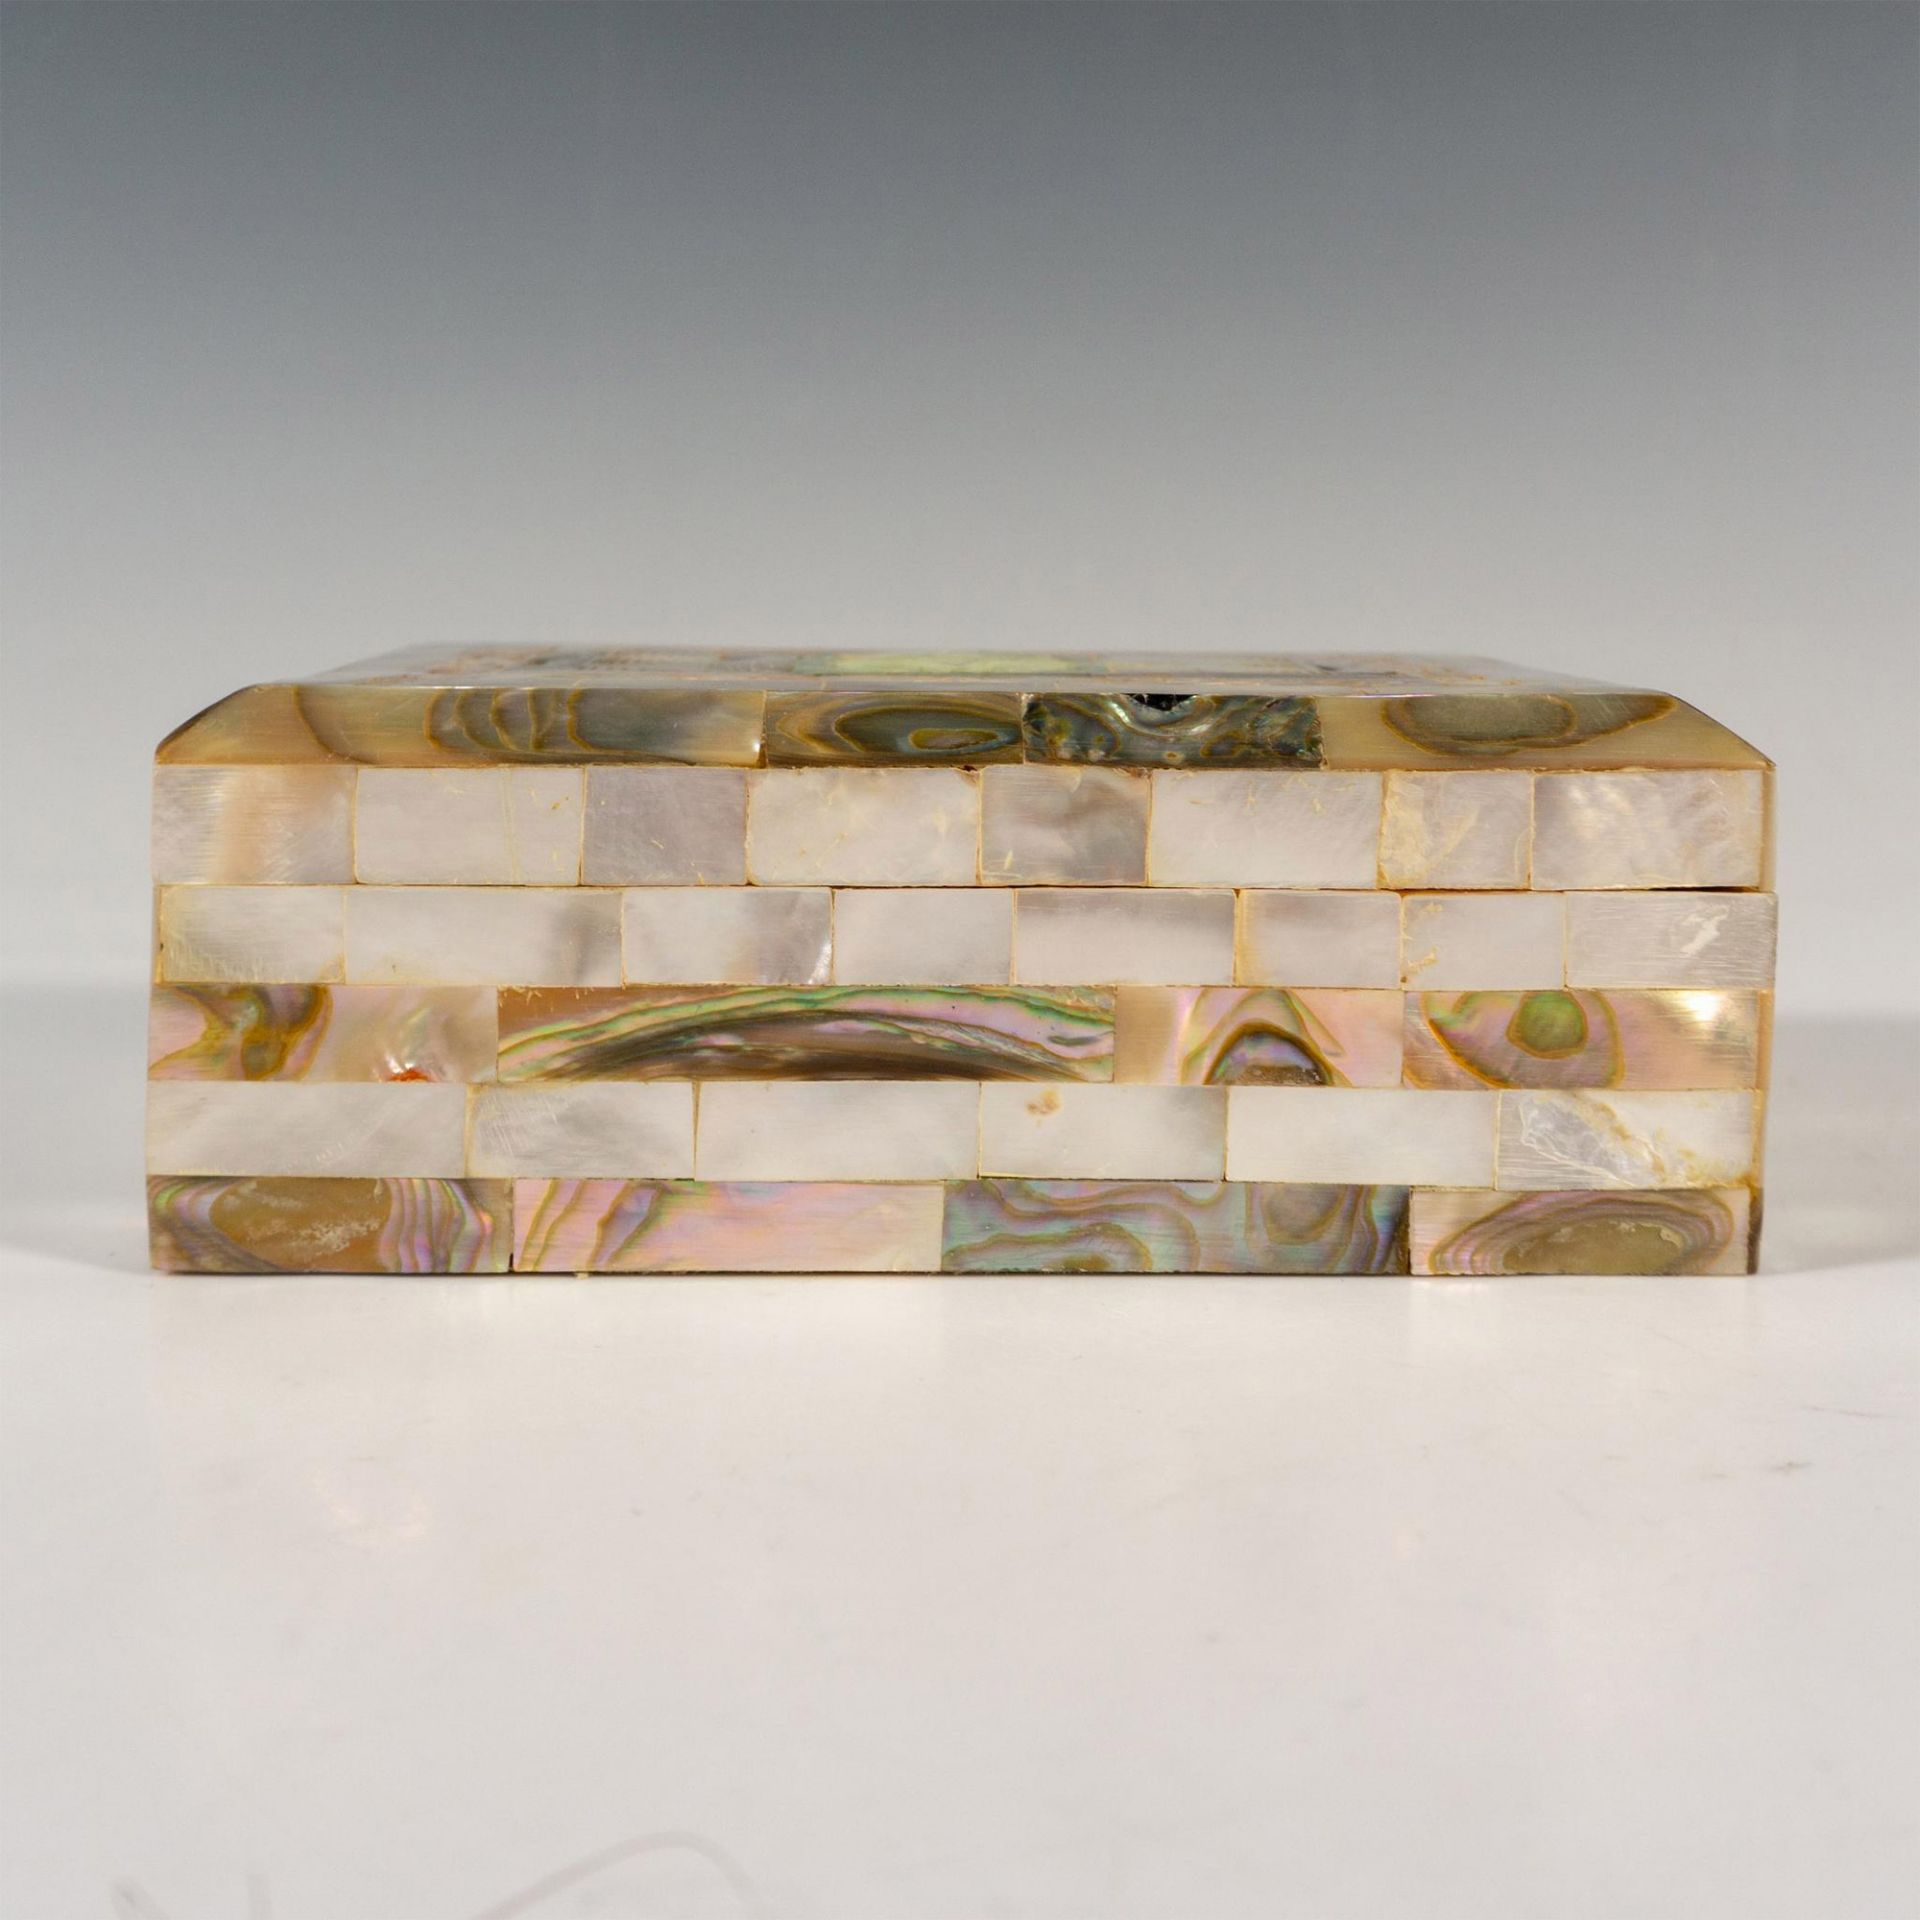 Vintage Mother of Pearl Judaica Jewelry Box - Image 2 of 5